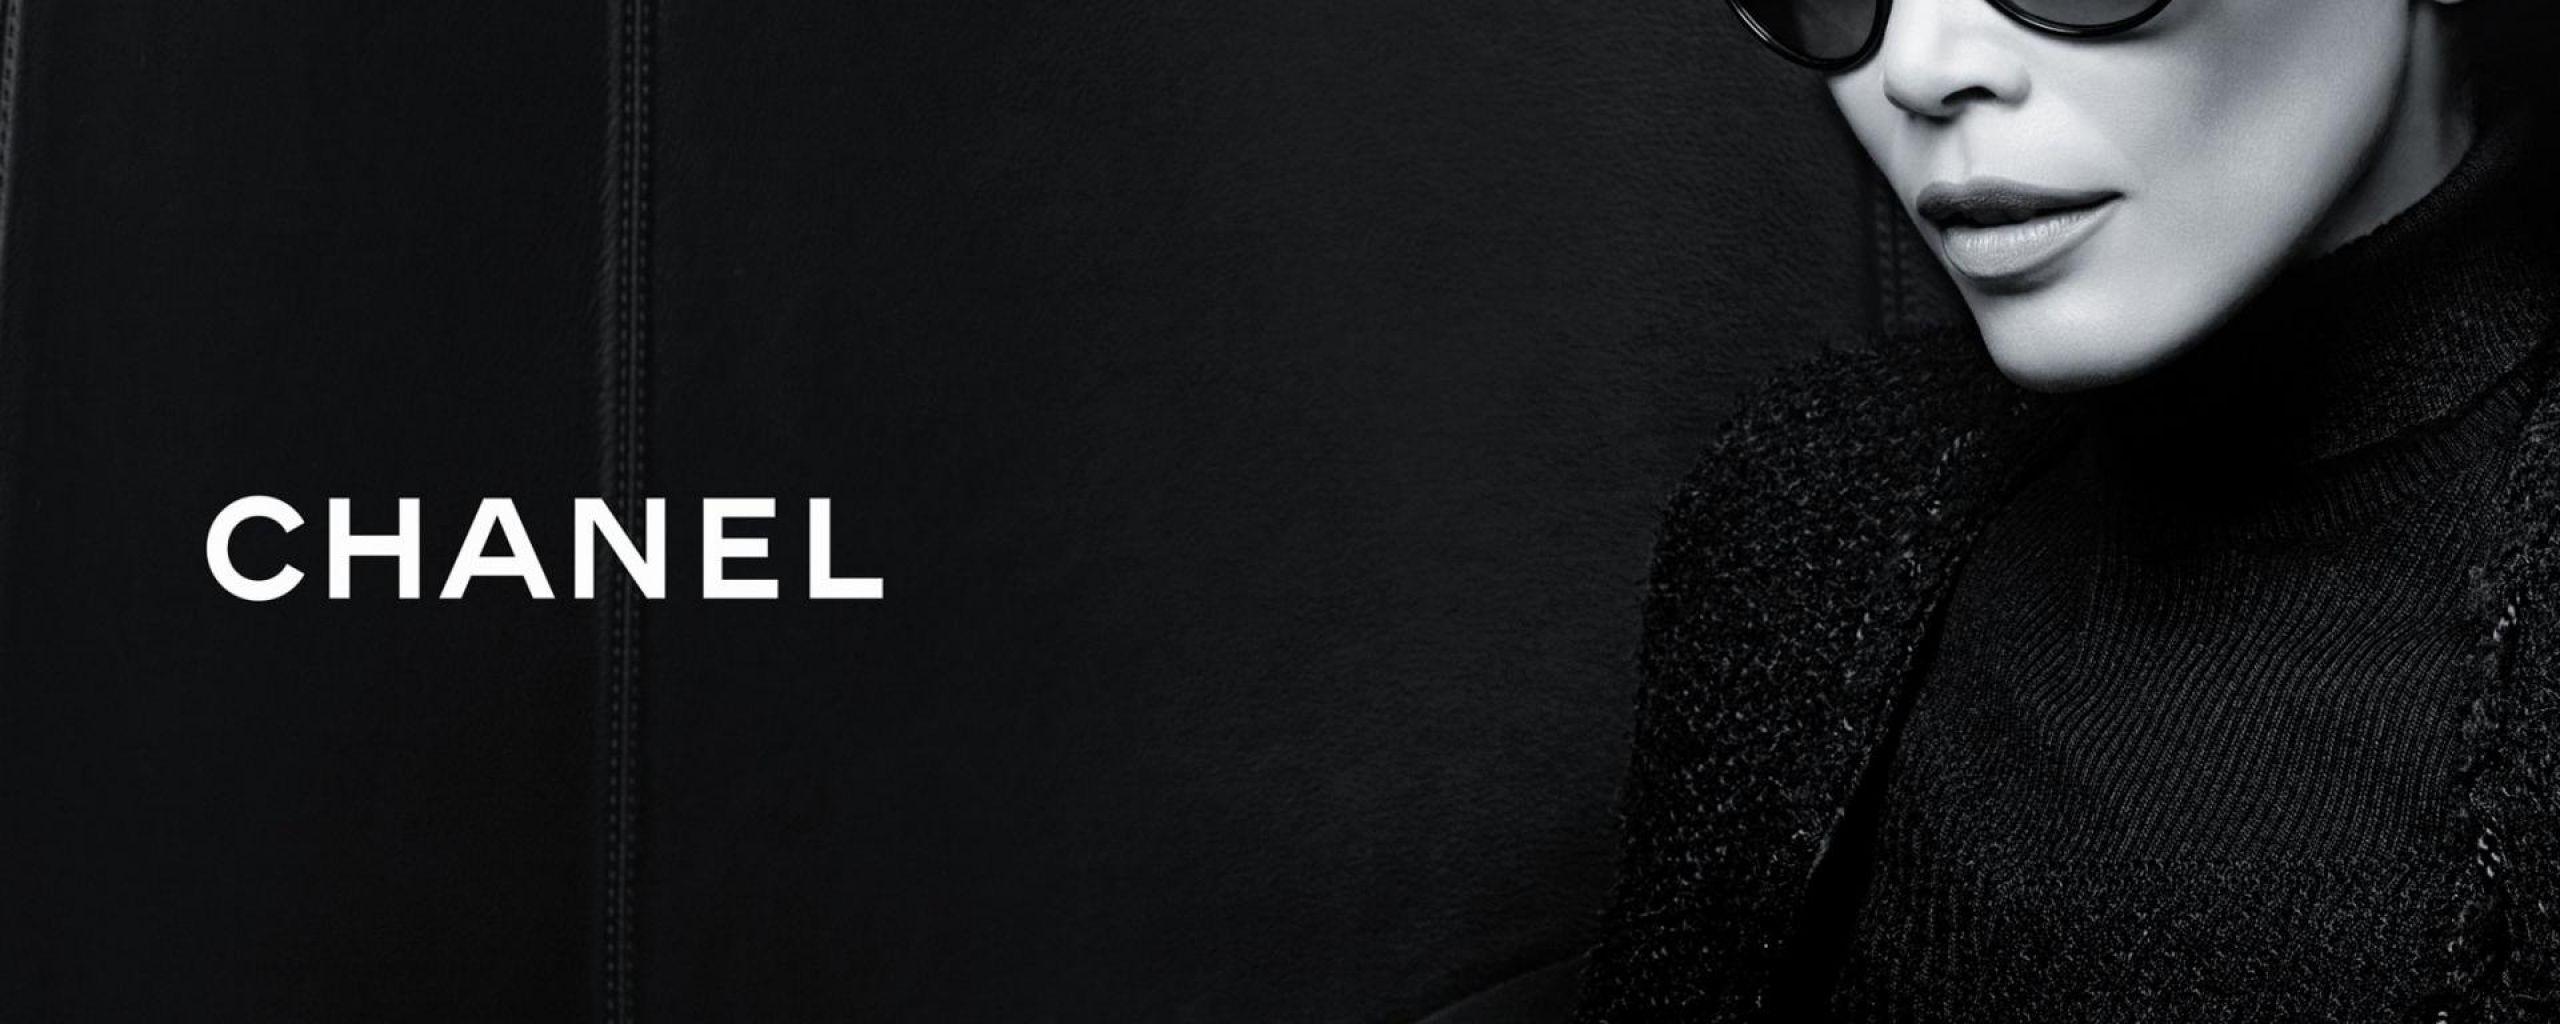 Collection of Chanel Desktop Wallpapers on HDWallpapers 2560×1024